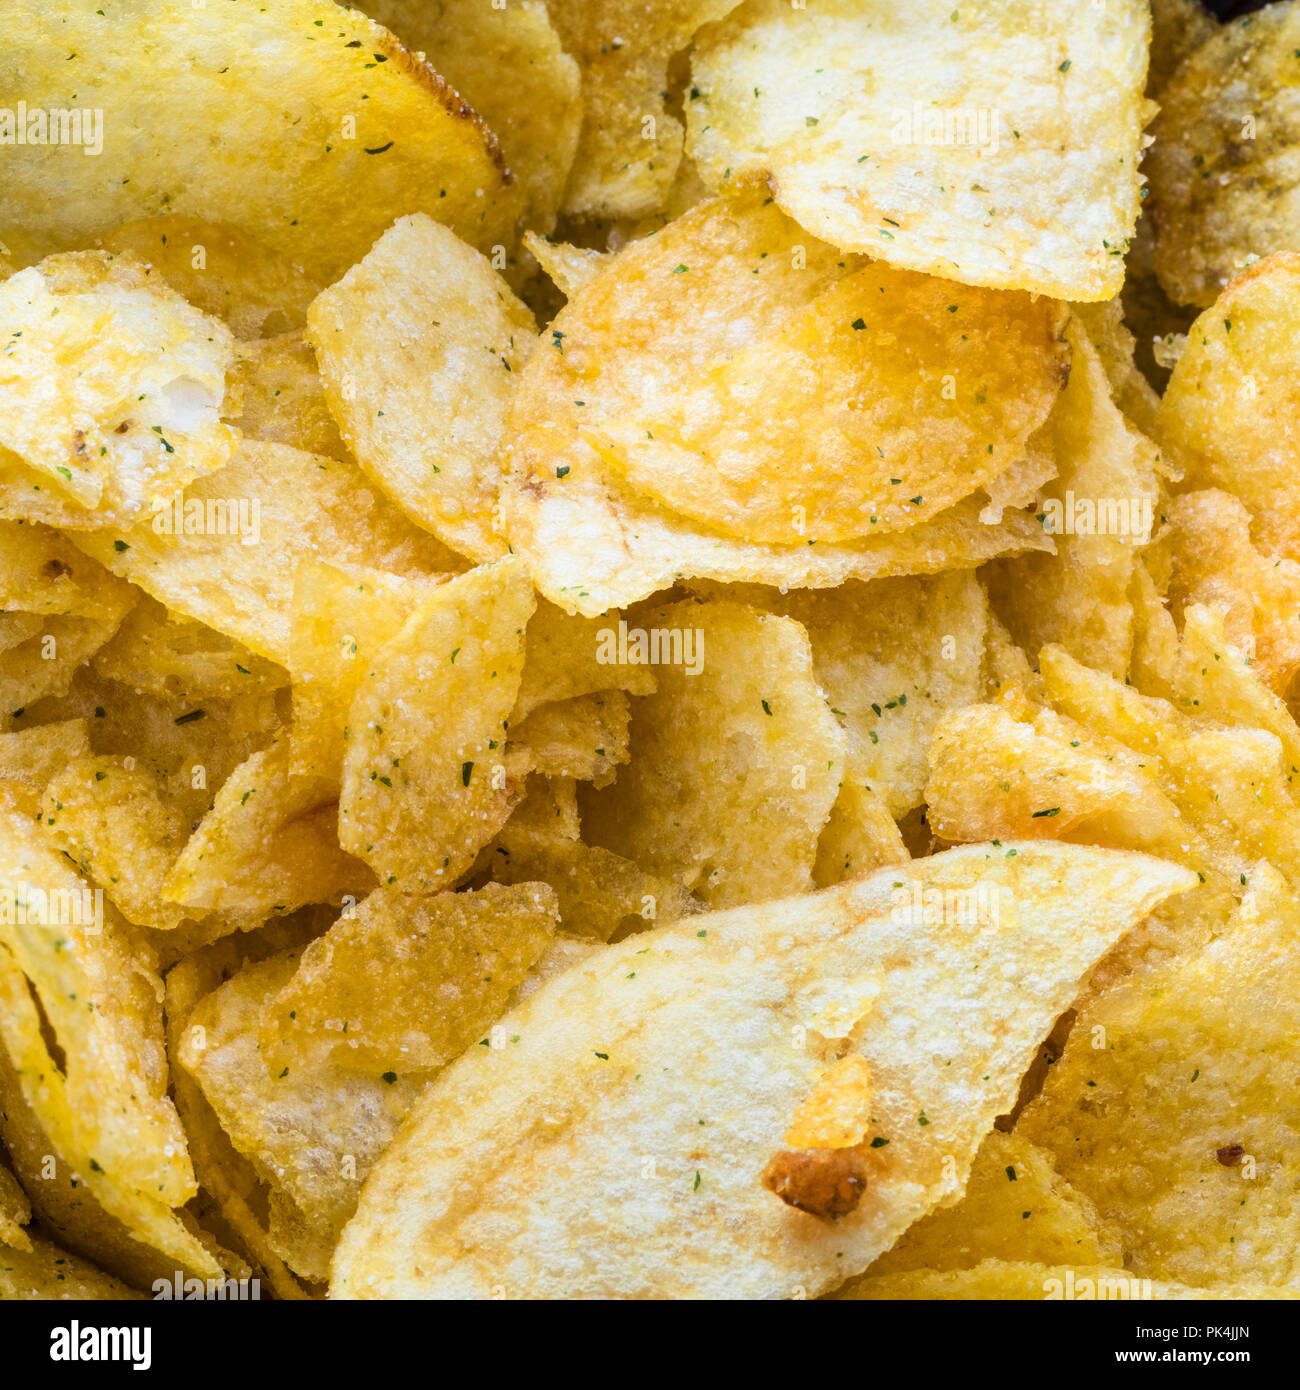 many potato chips with herbs flavor close up Stock Photo